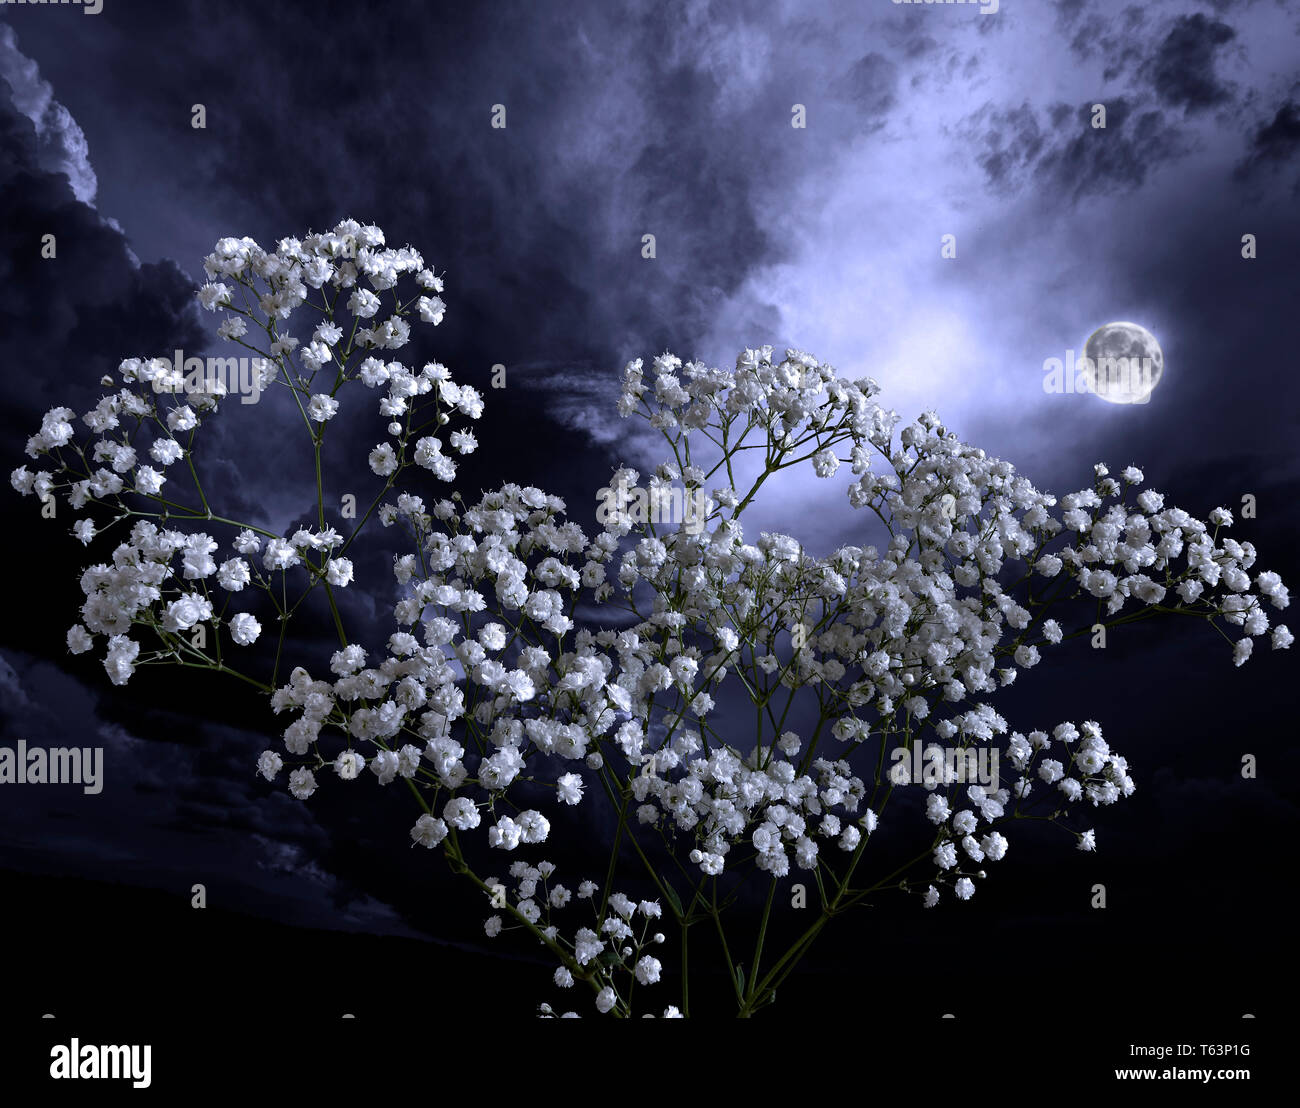 Summer moon night in the blossoming garden. Full moon glowing over white yarrow or milfoil (Achillea ptarmica) flowers. Romantic floral background Stock Photo